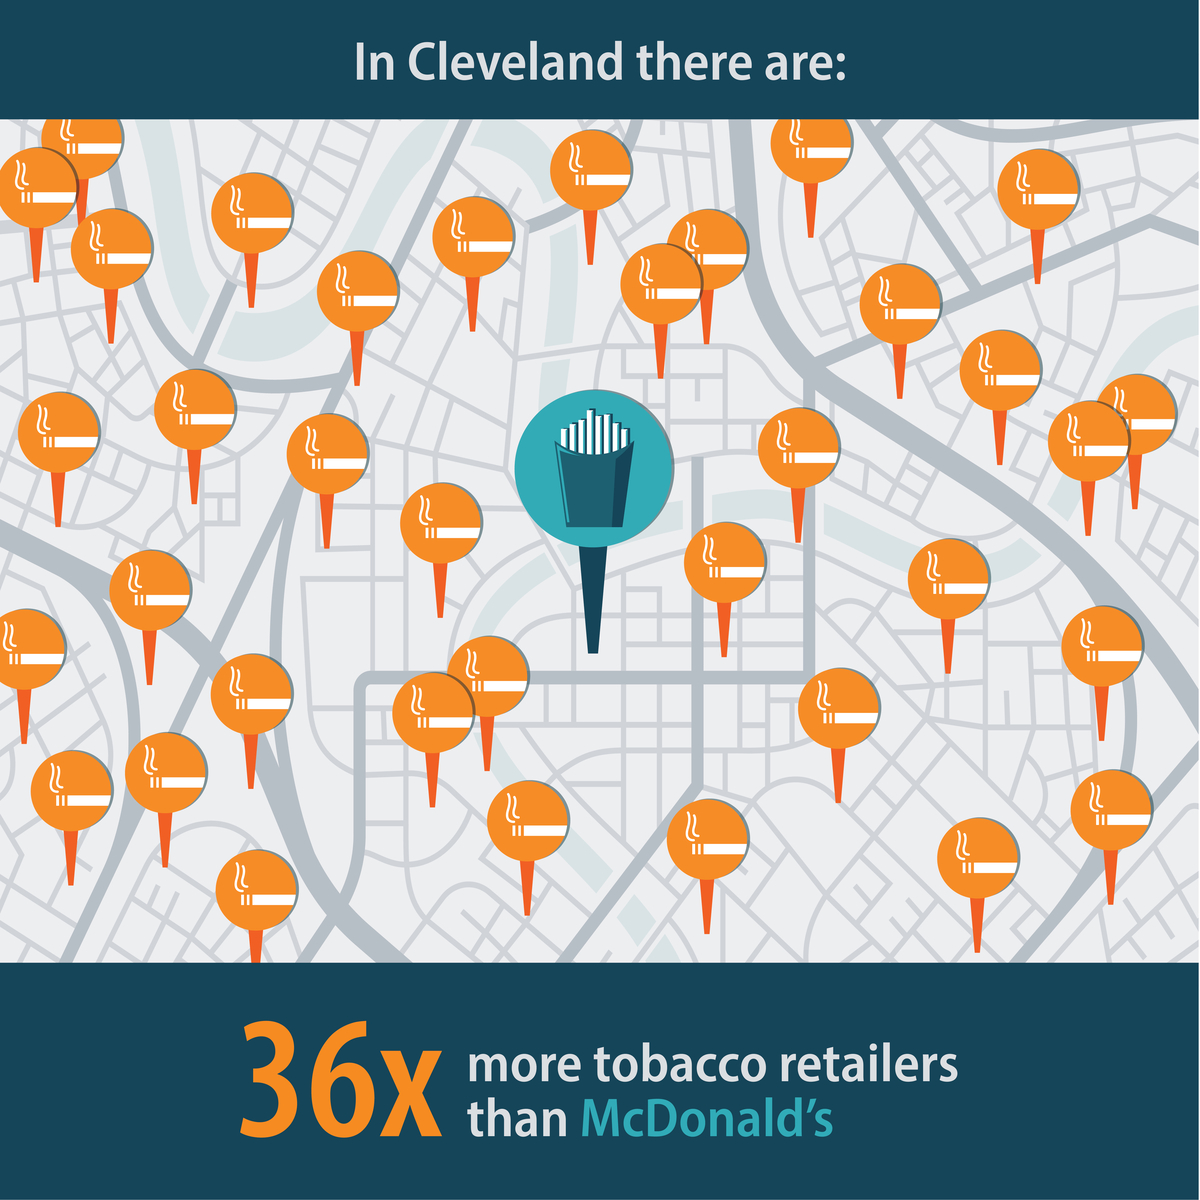 In Cleveland there are: 36 times more tobacco retailers than McDonald's